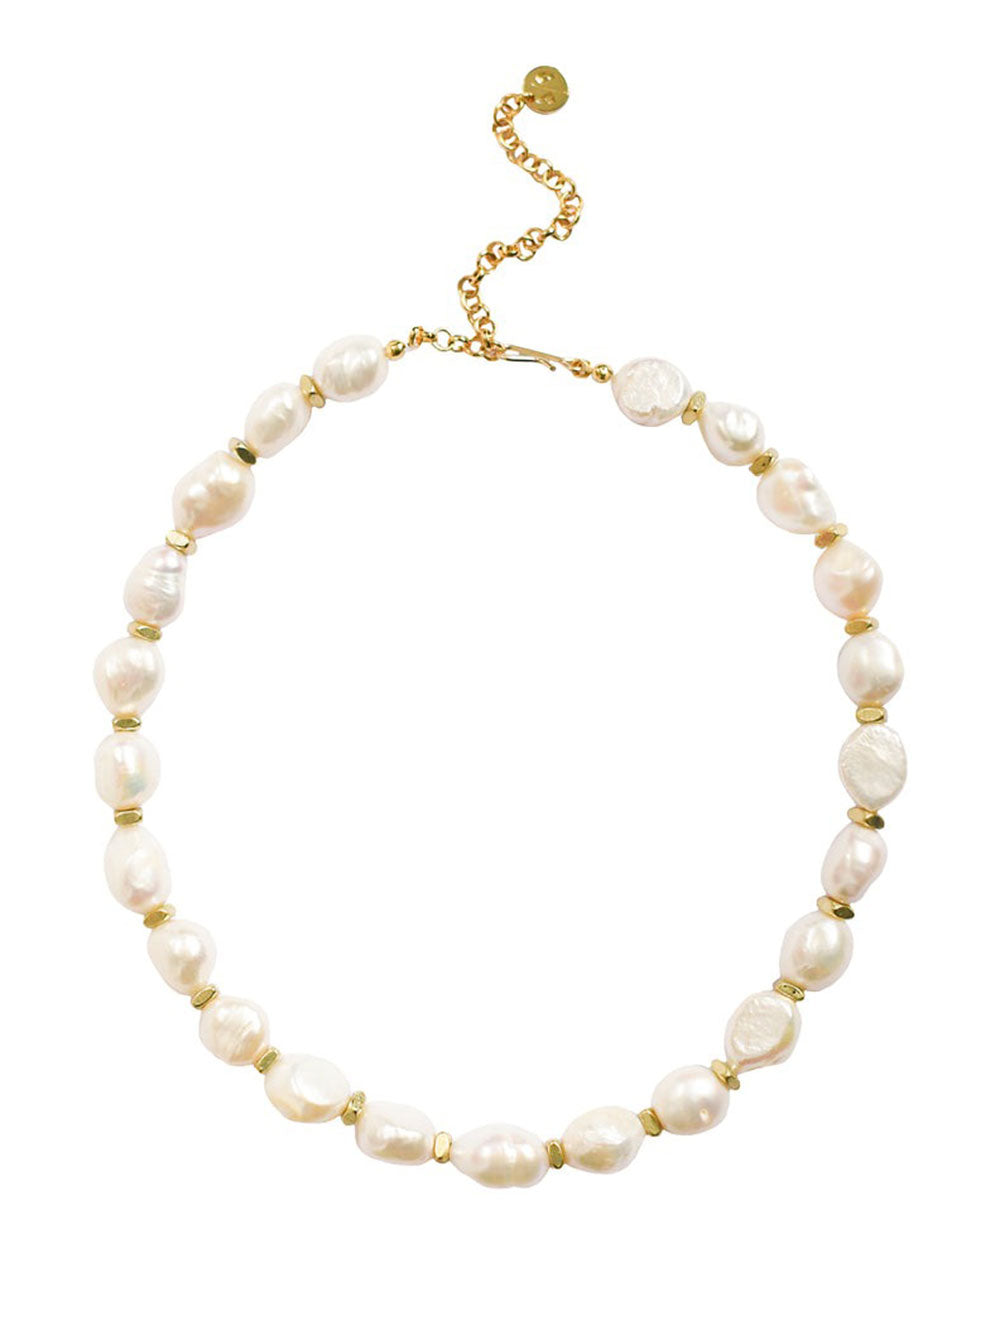 Adriana Pappas Pearl Nugget Choker Necklace